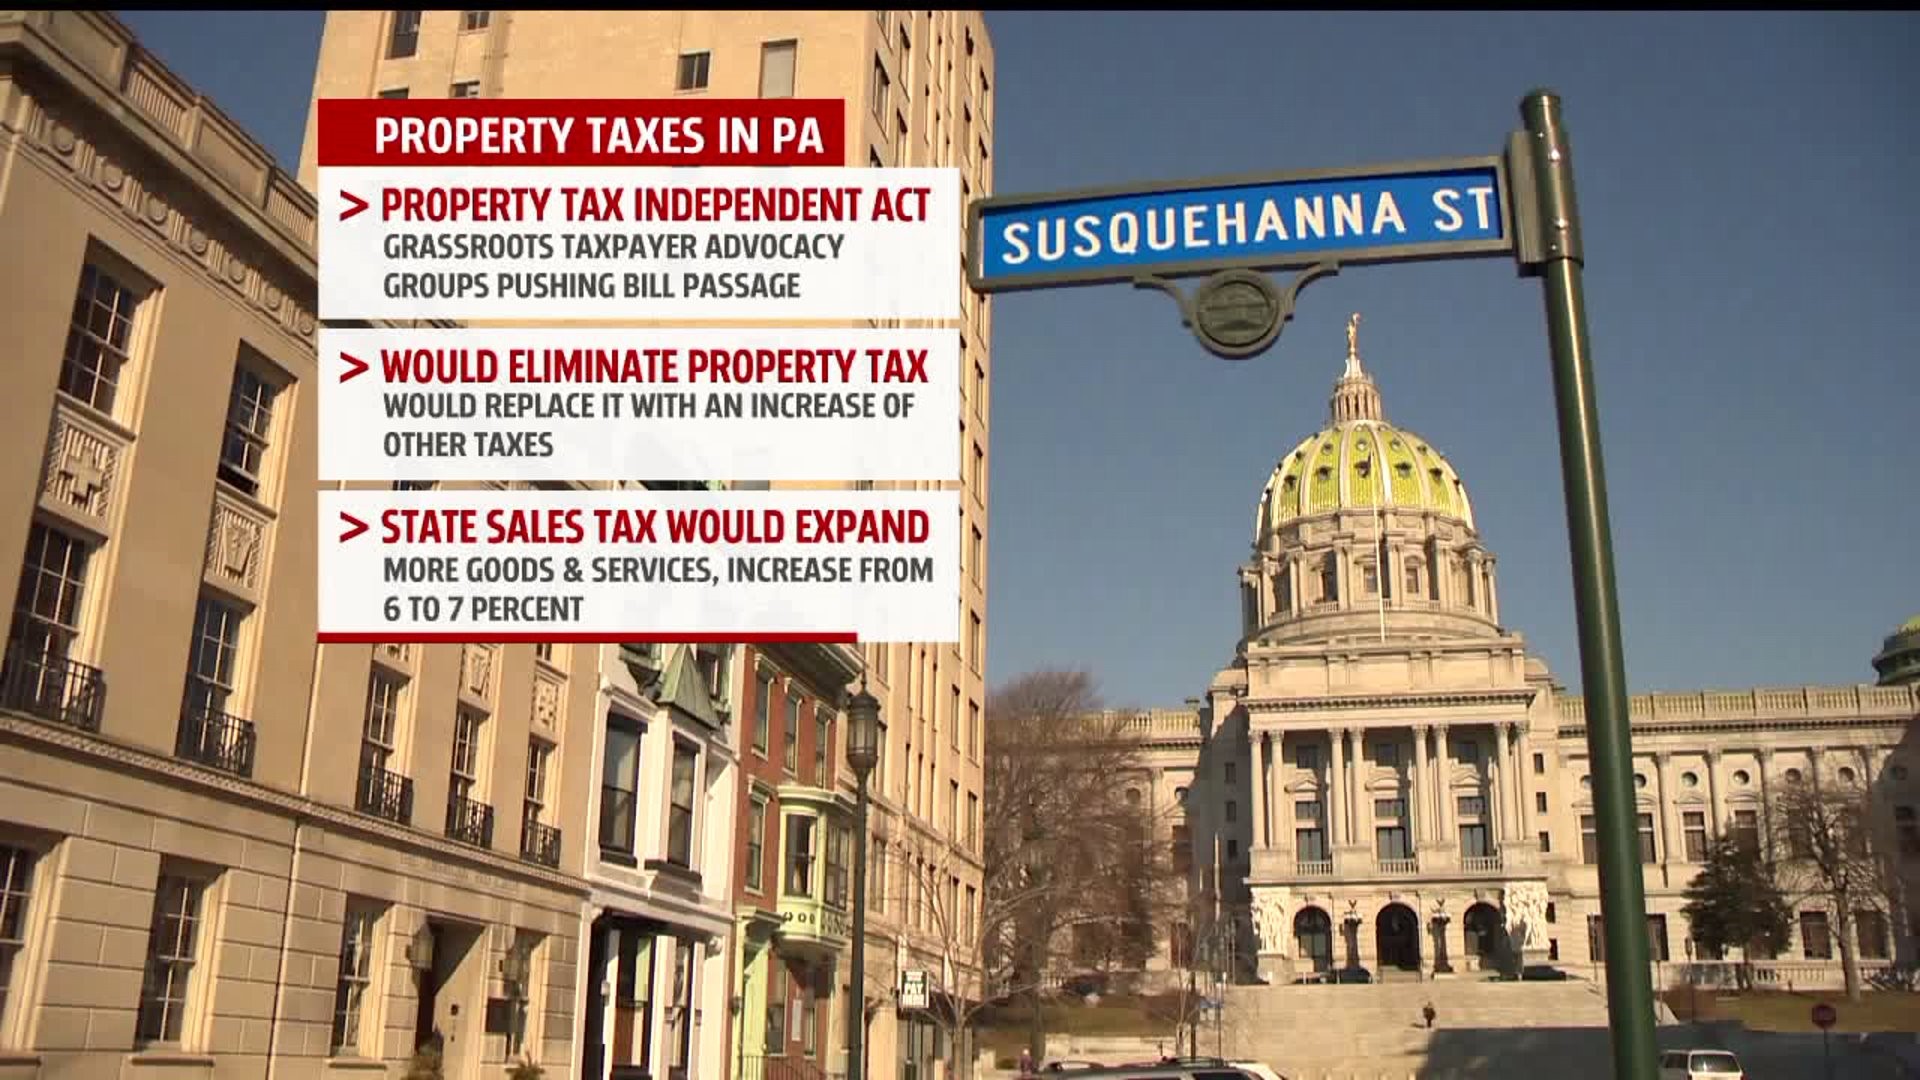 Ask Evan: When are we Pennsylvanians going to get a break with our property taxes?